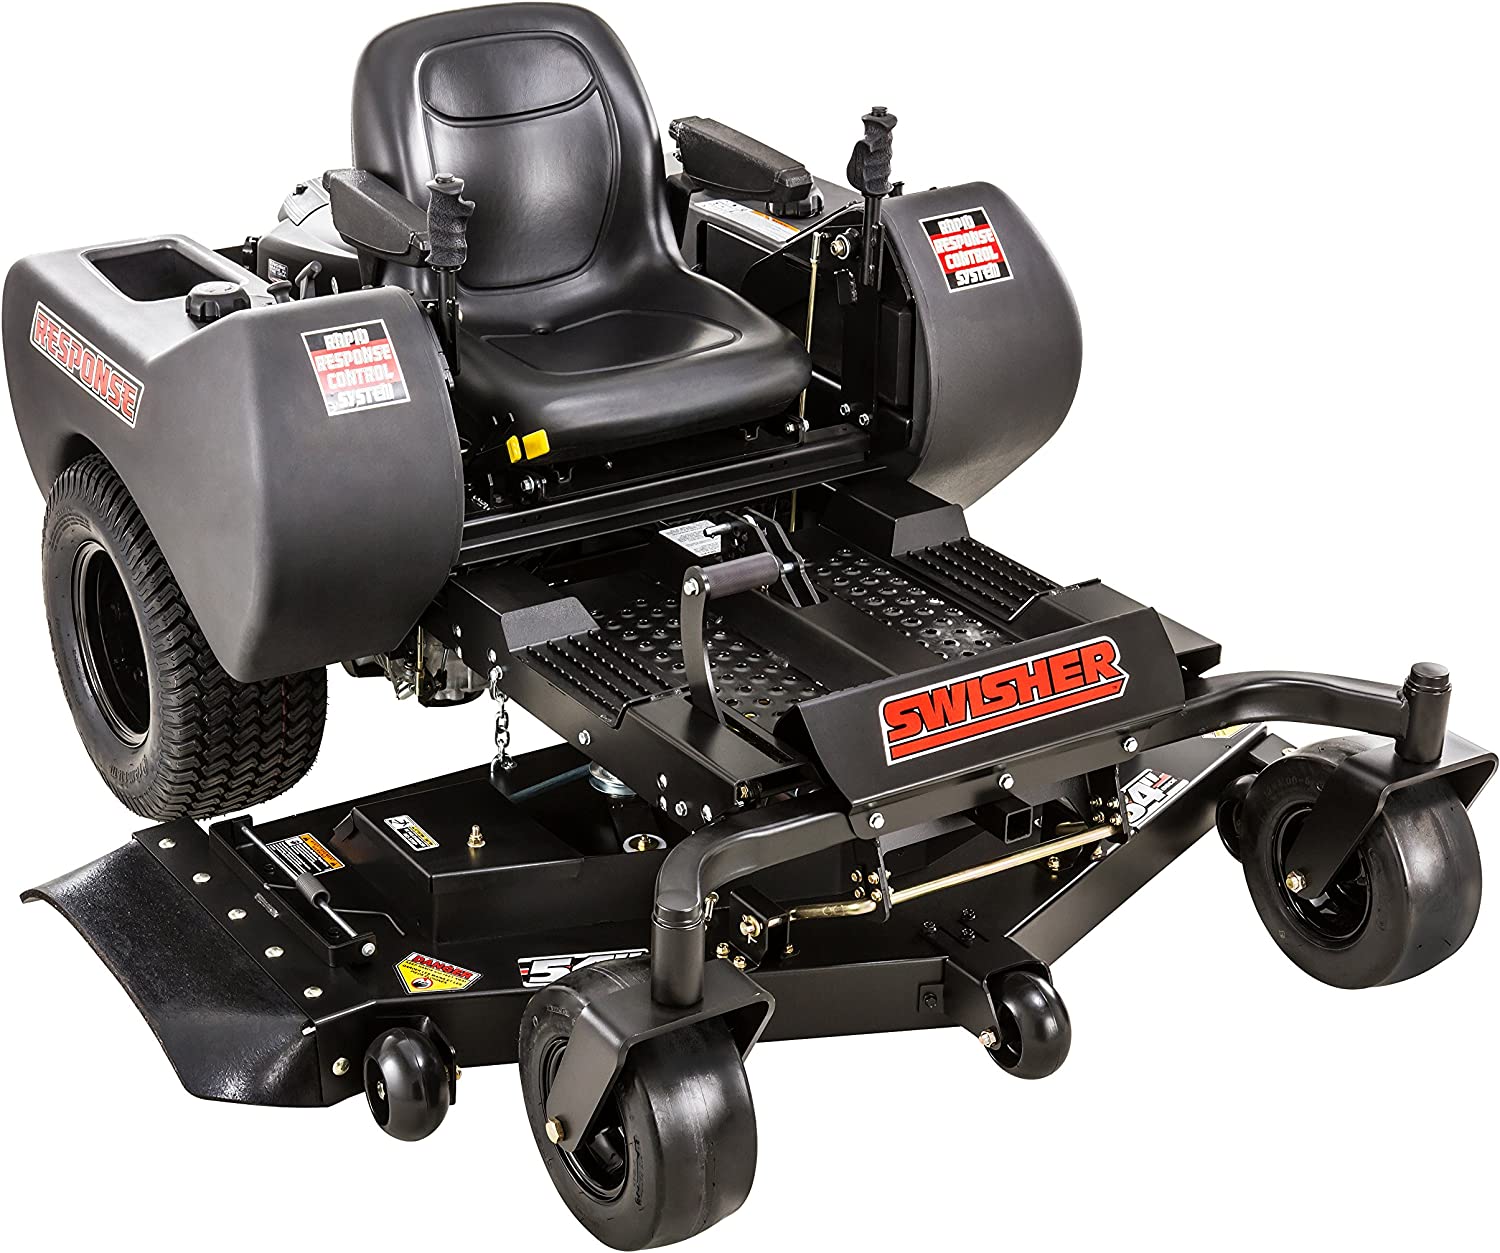 Top 5 Best Commercial Lawn Mower Reviews of 2020